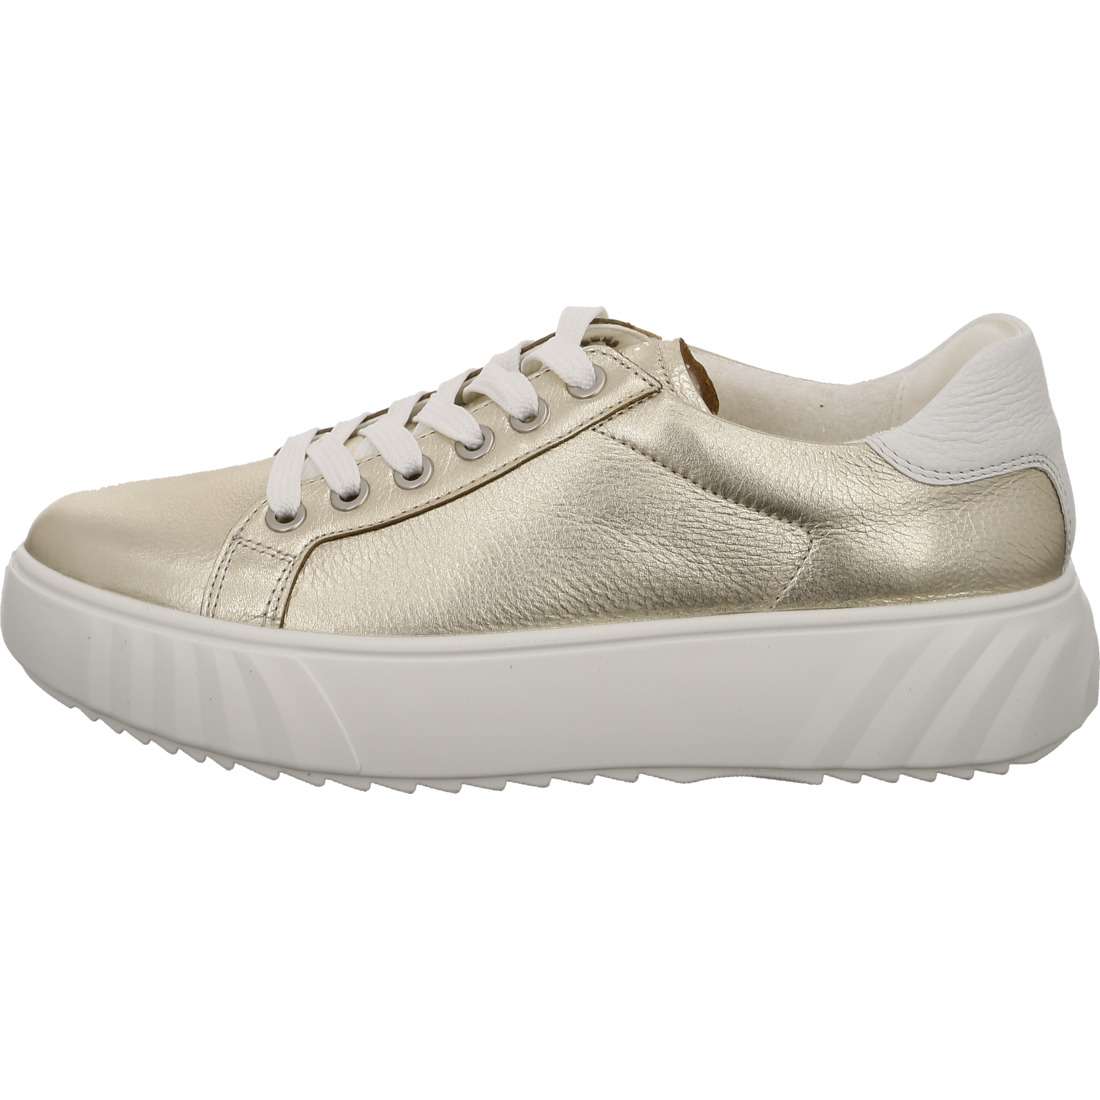     Front view of Ara Monaco gold and white extra wide fit sneaker.